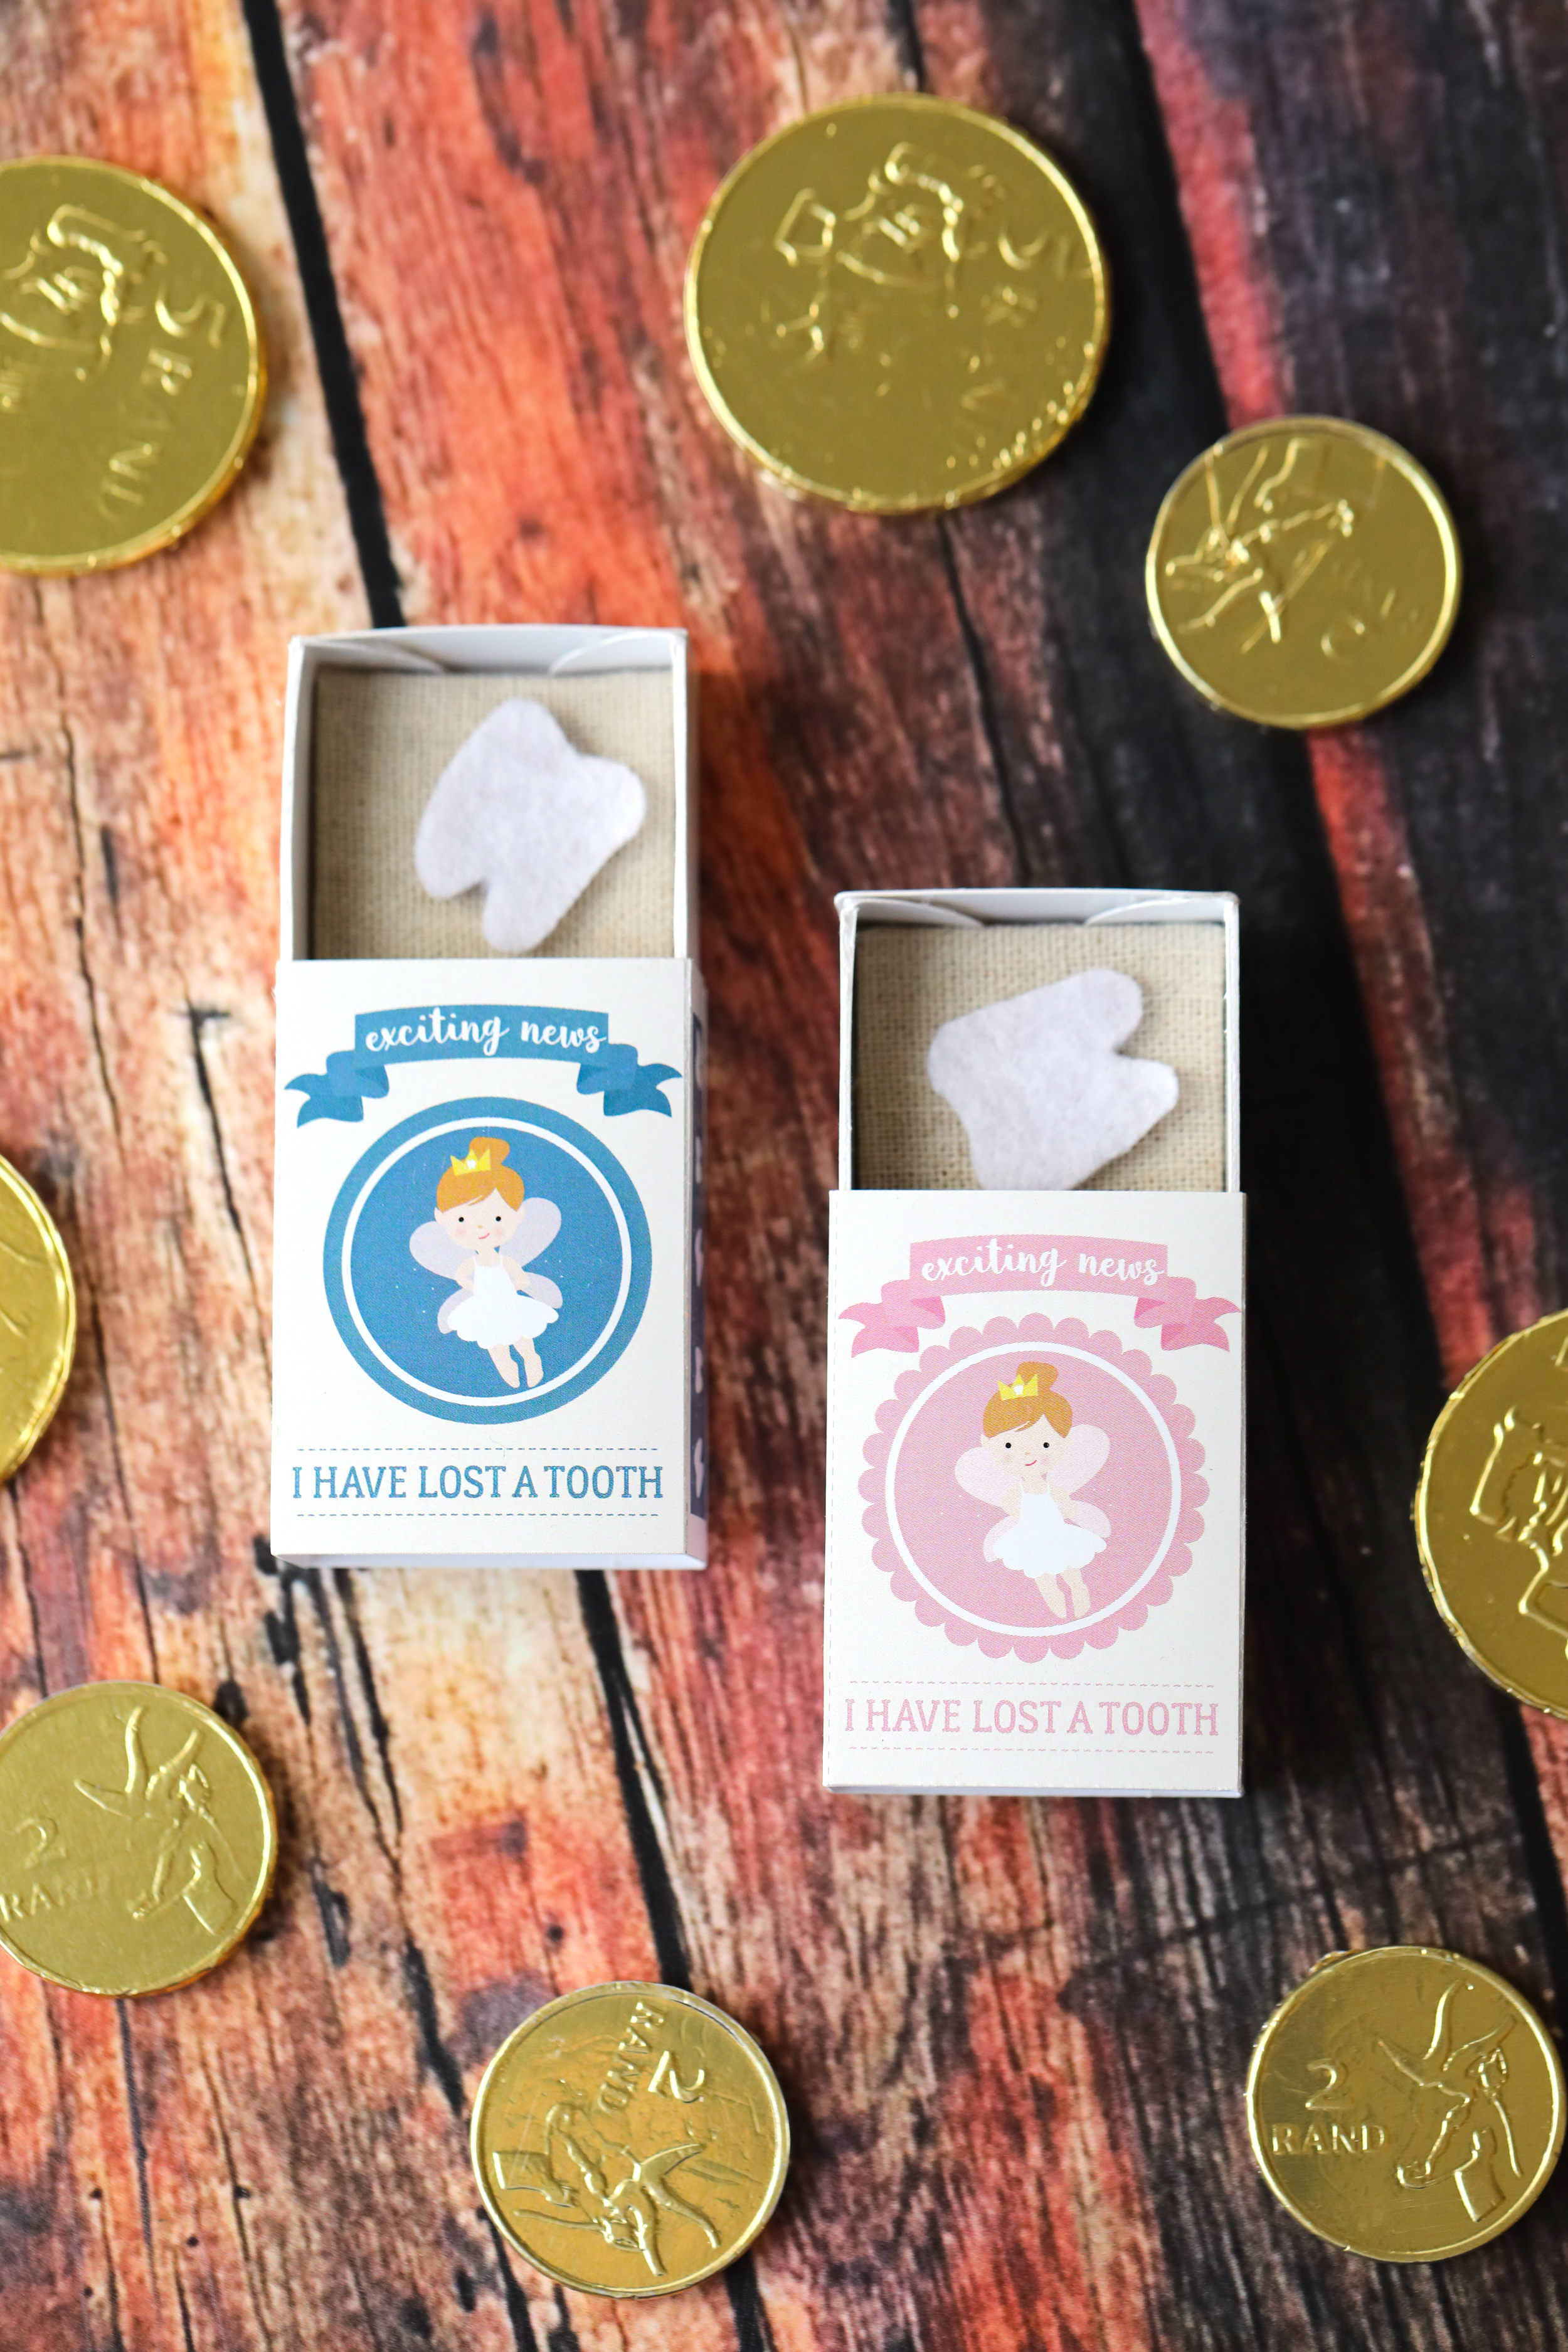 Free Toothfairy matchbox printable in pink and blue!